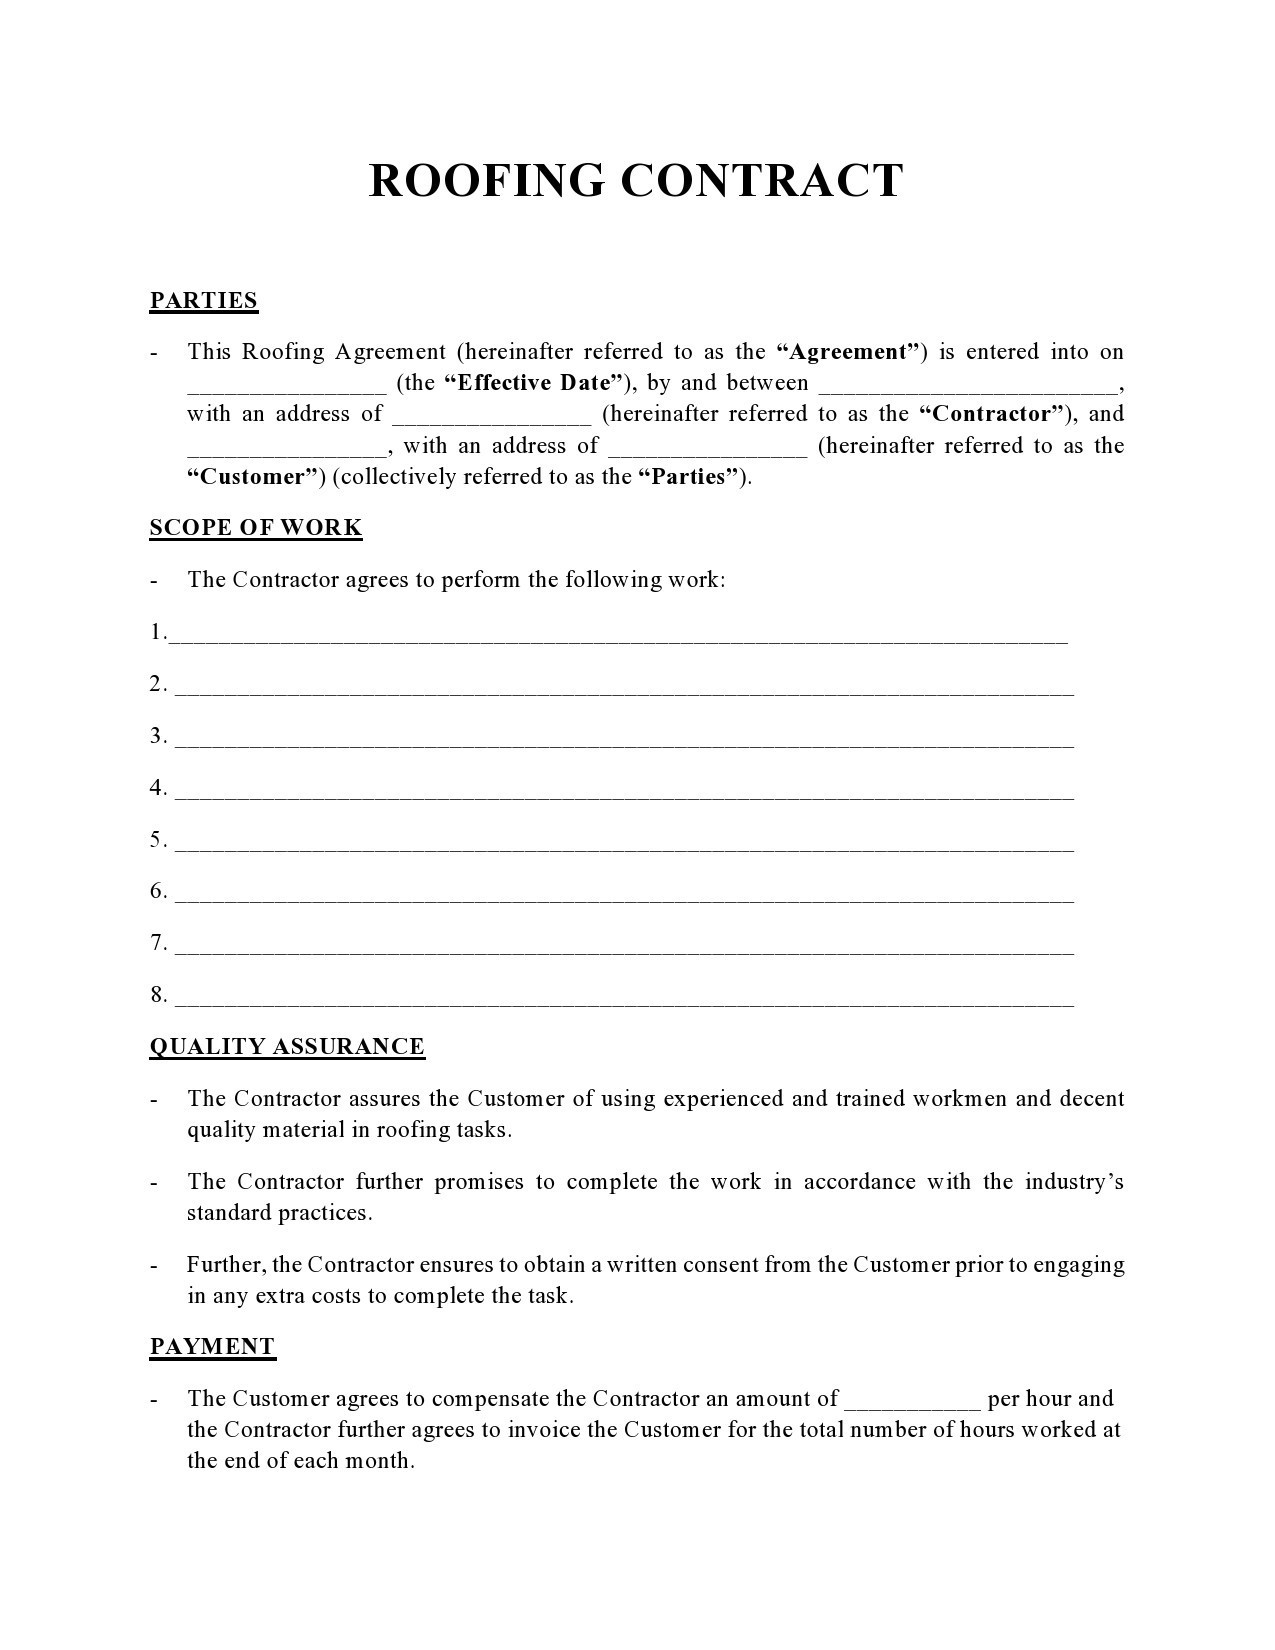 Free roofing contract 08